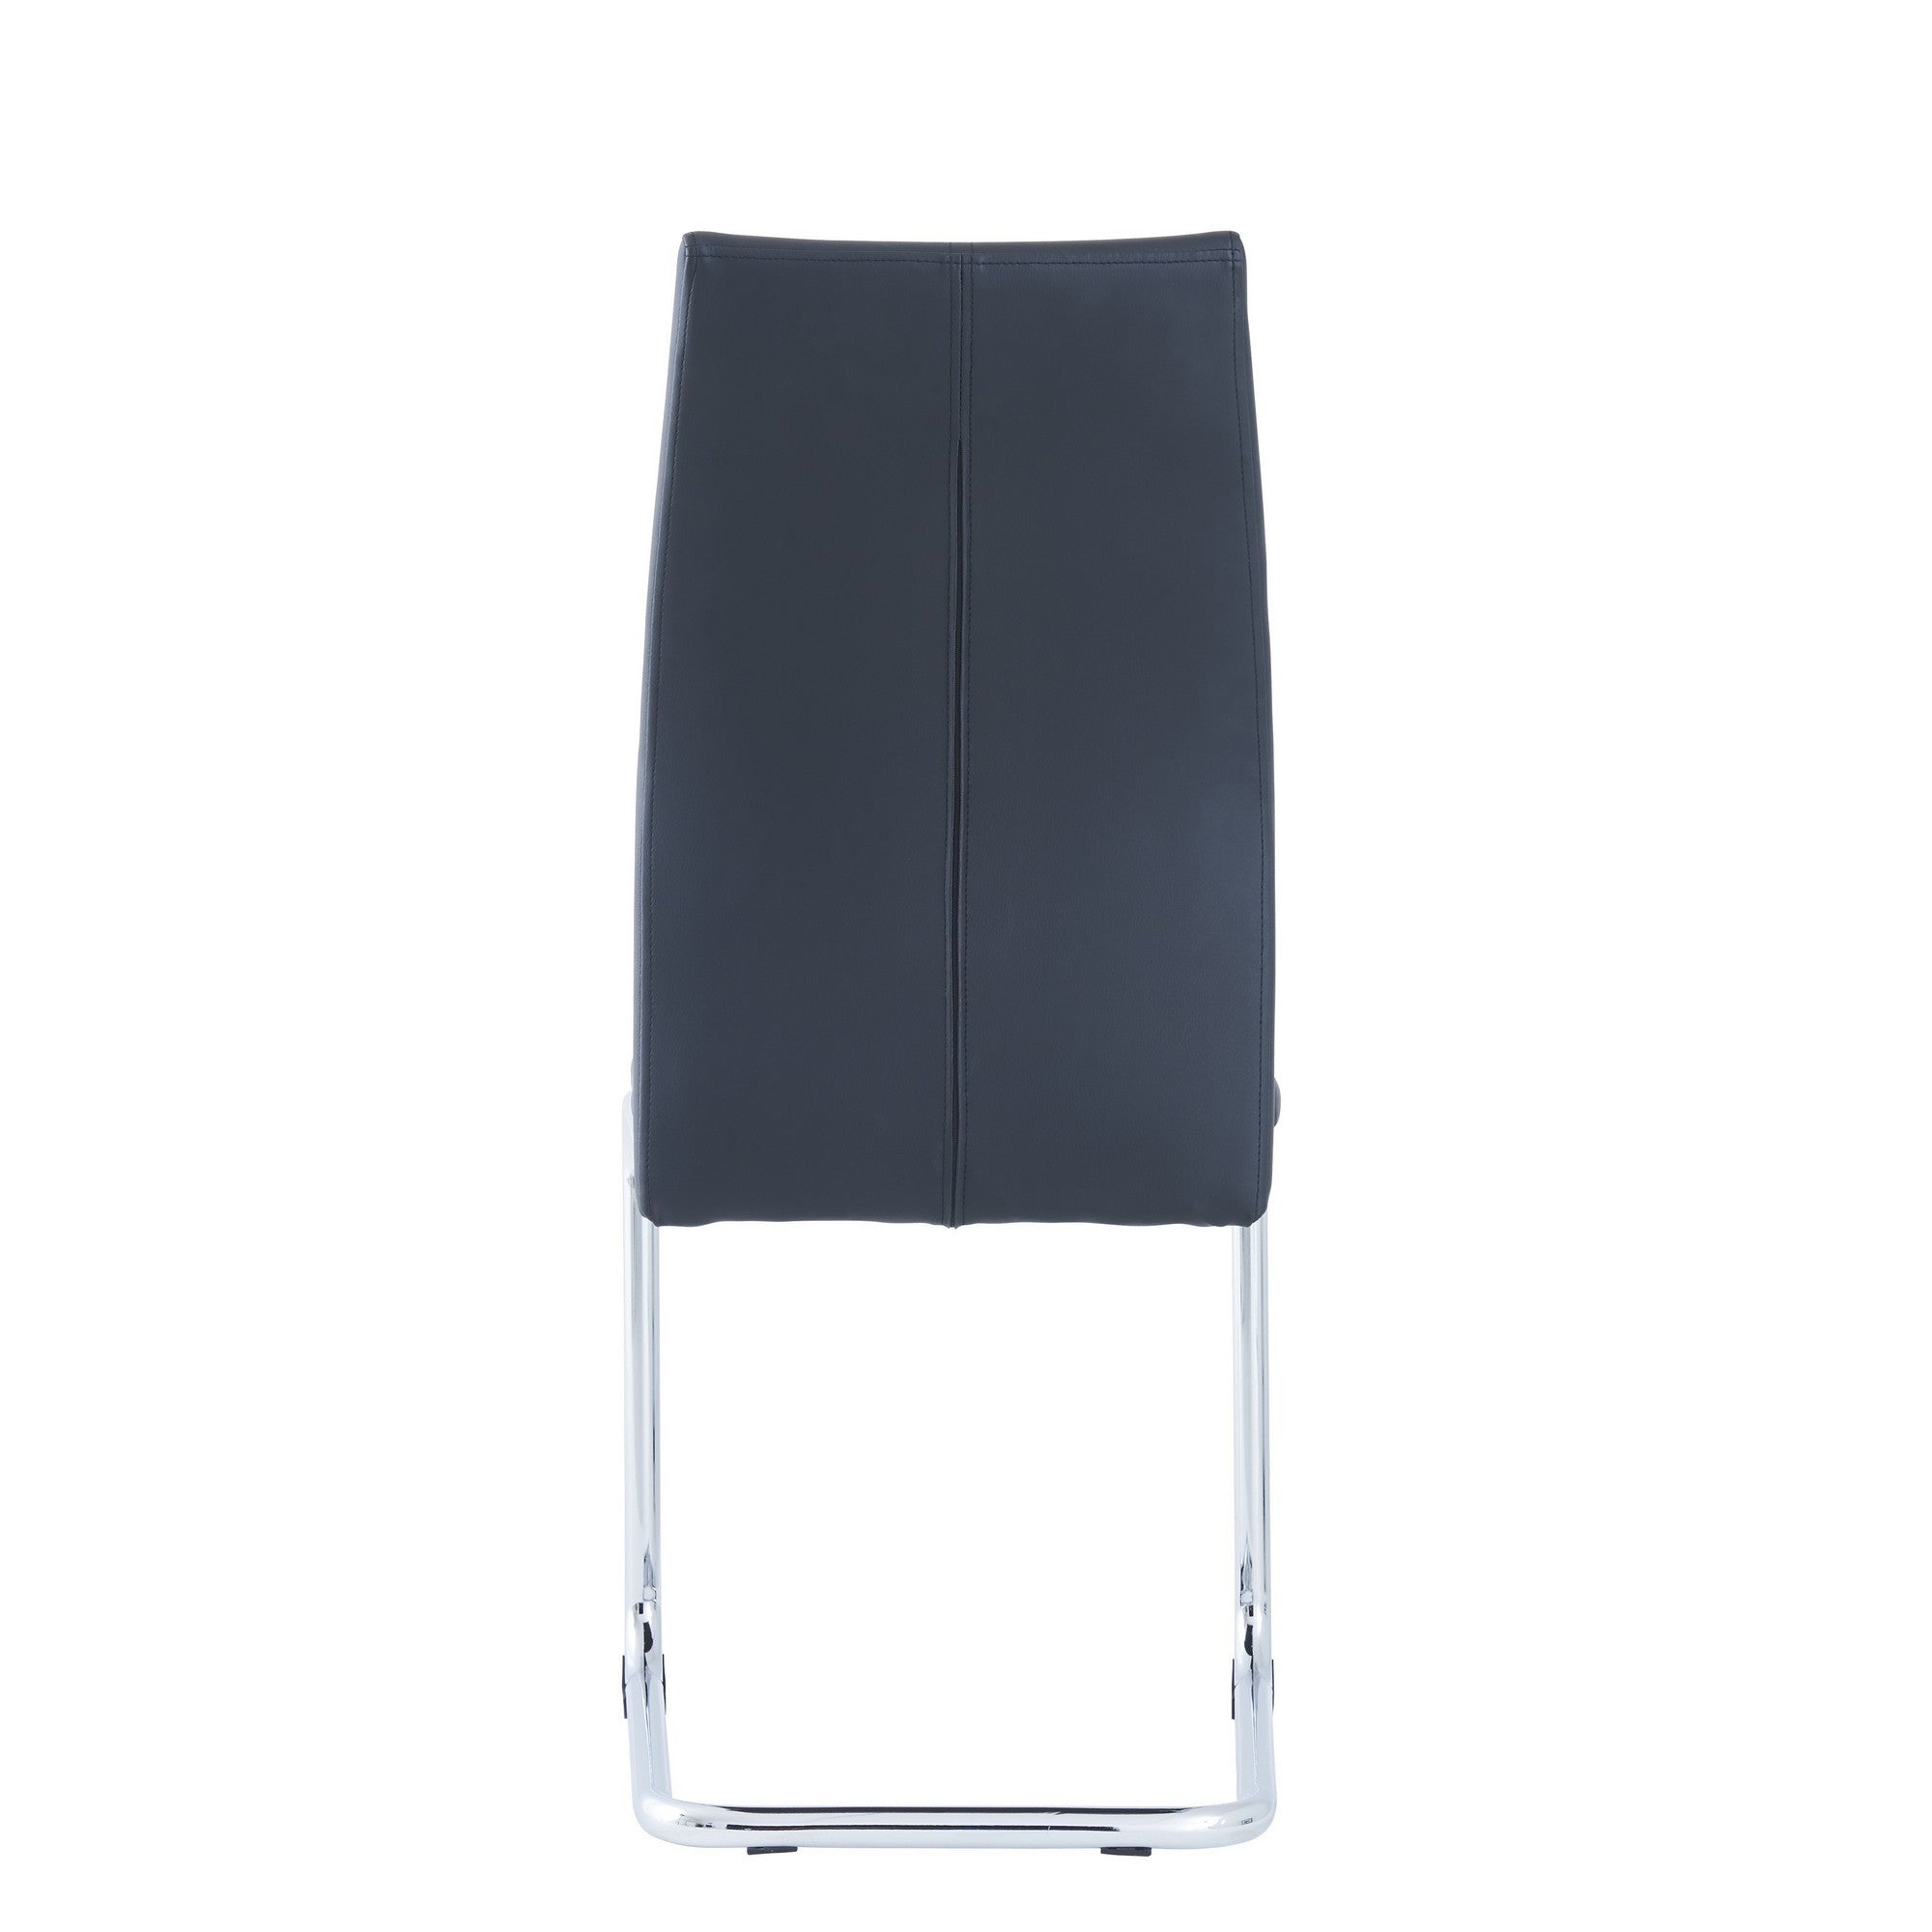 Set Of 4 Modern Black Dining Chairs With Chrome Metal Base